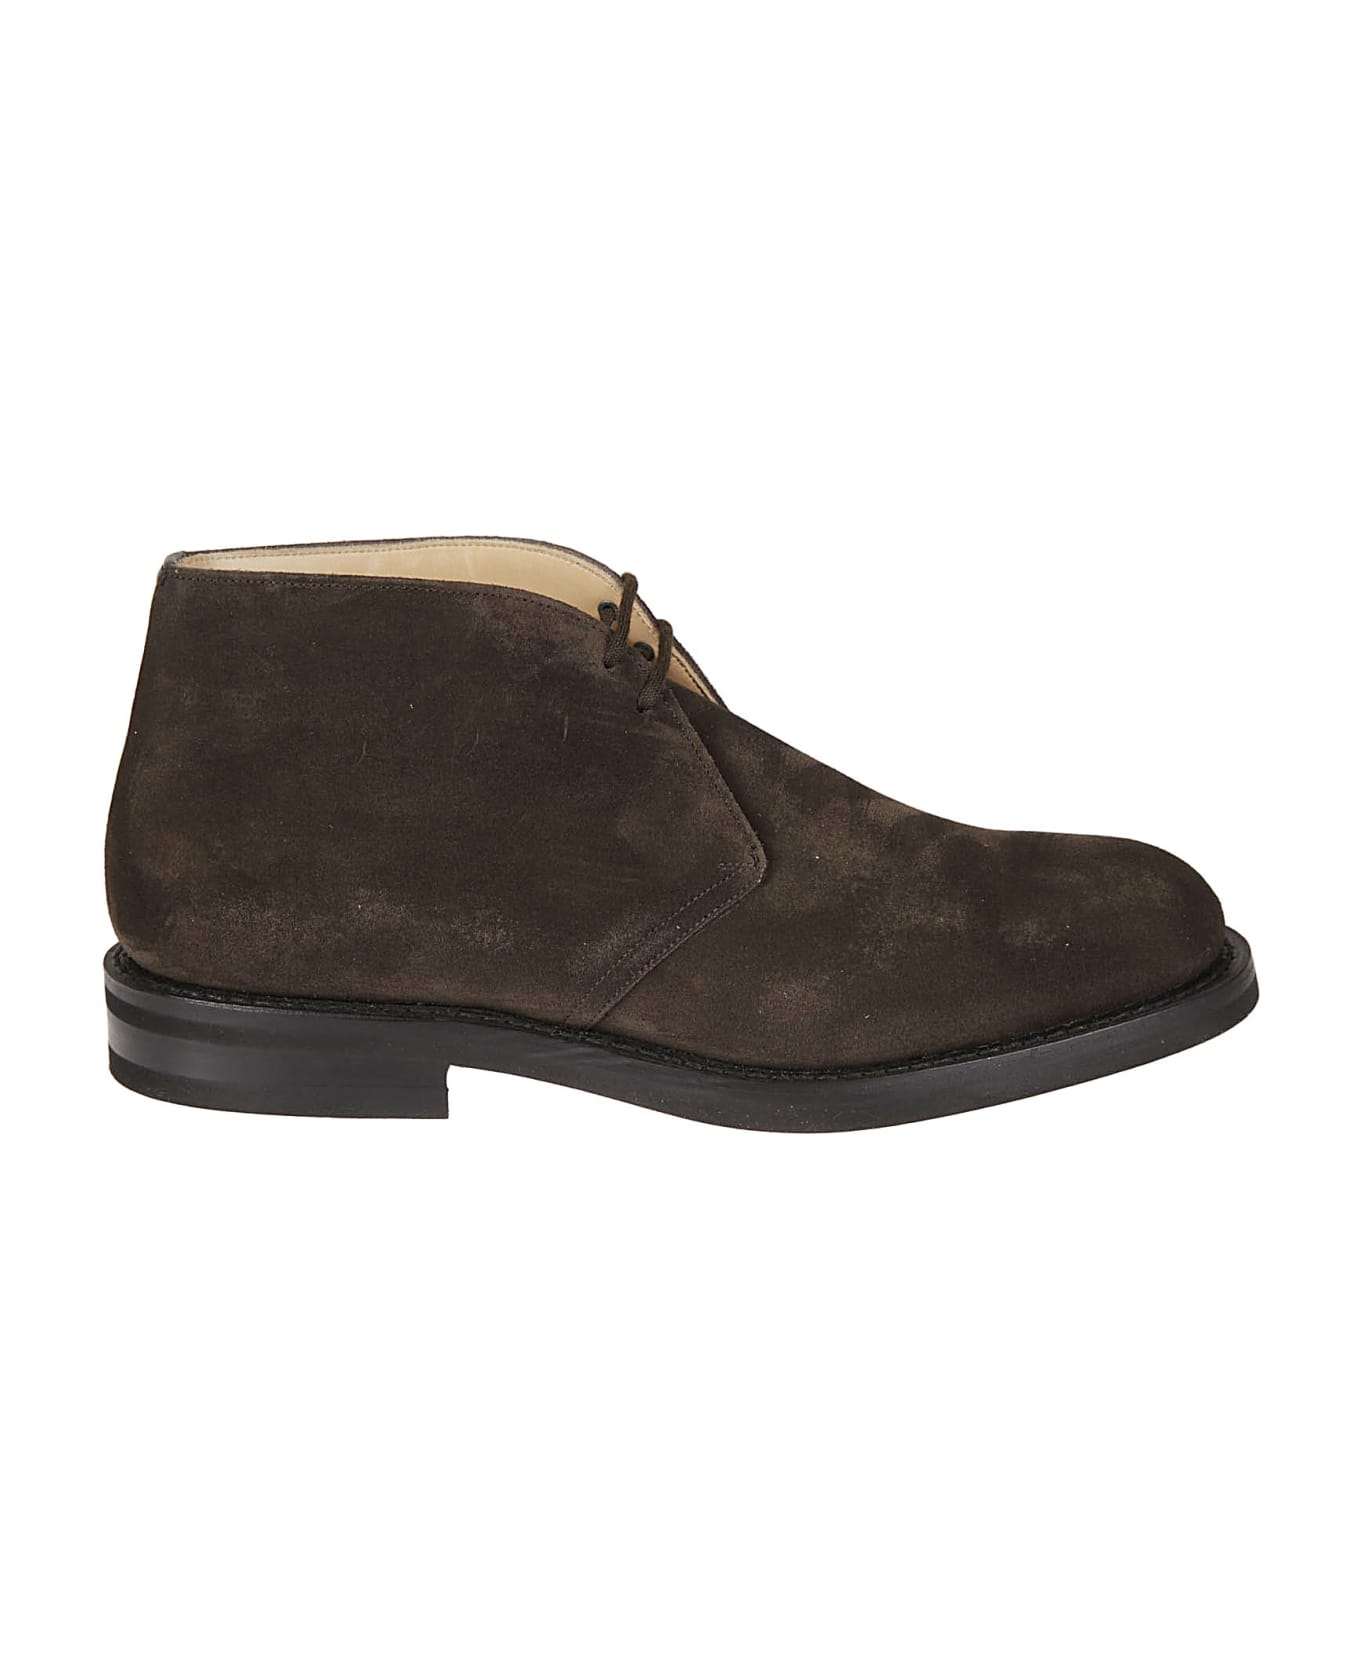 Church's Ryder Boots - Aad Brown